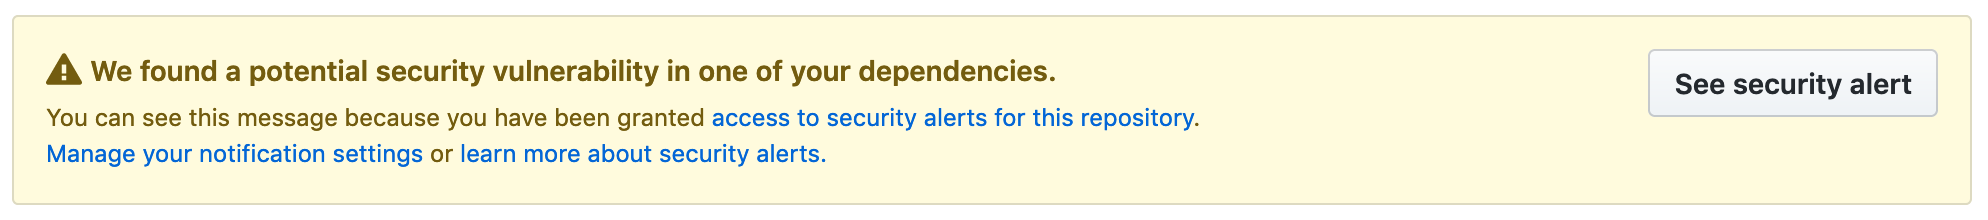 Screenshot of a GitHub alert which reads “We found a potential securityvulnerability in one of yourdependencies.”